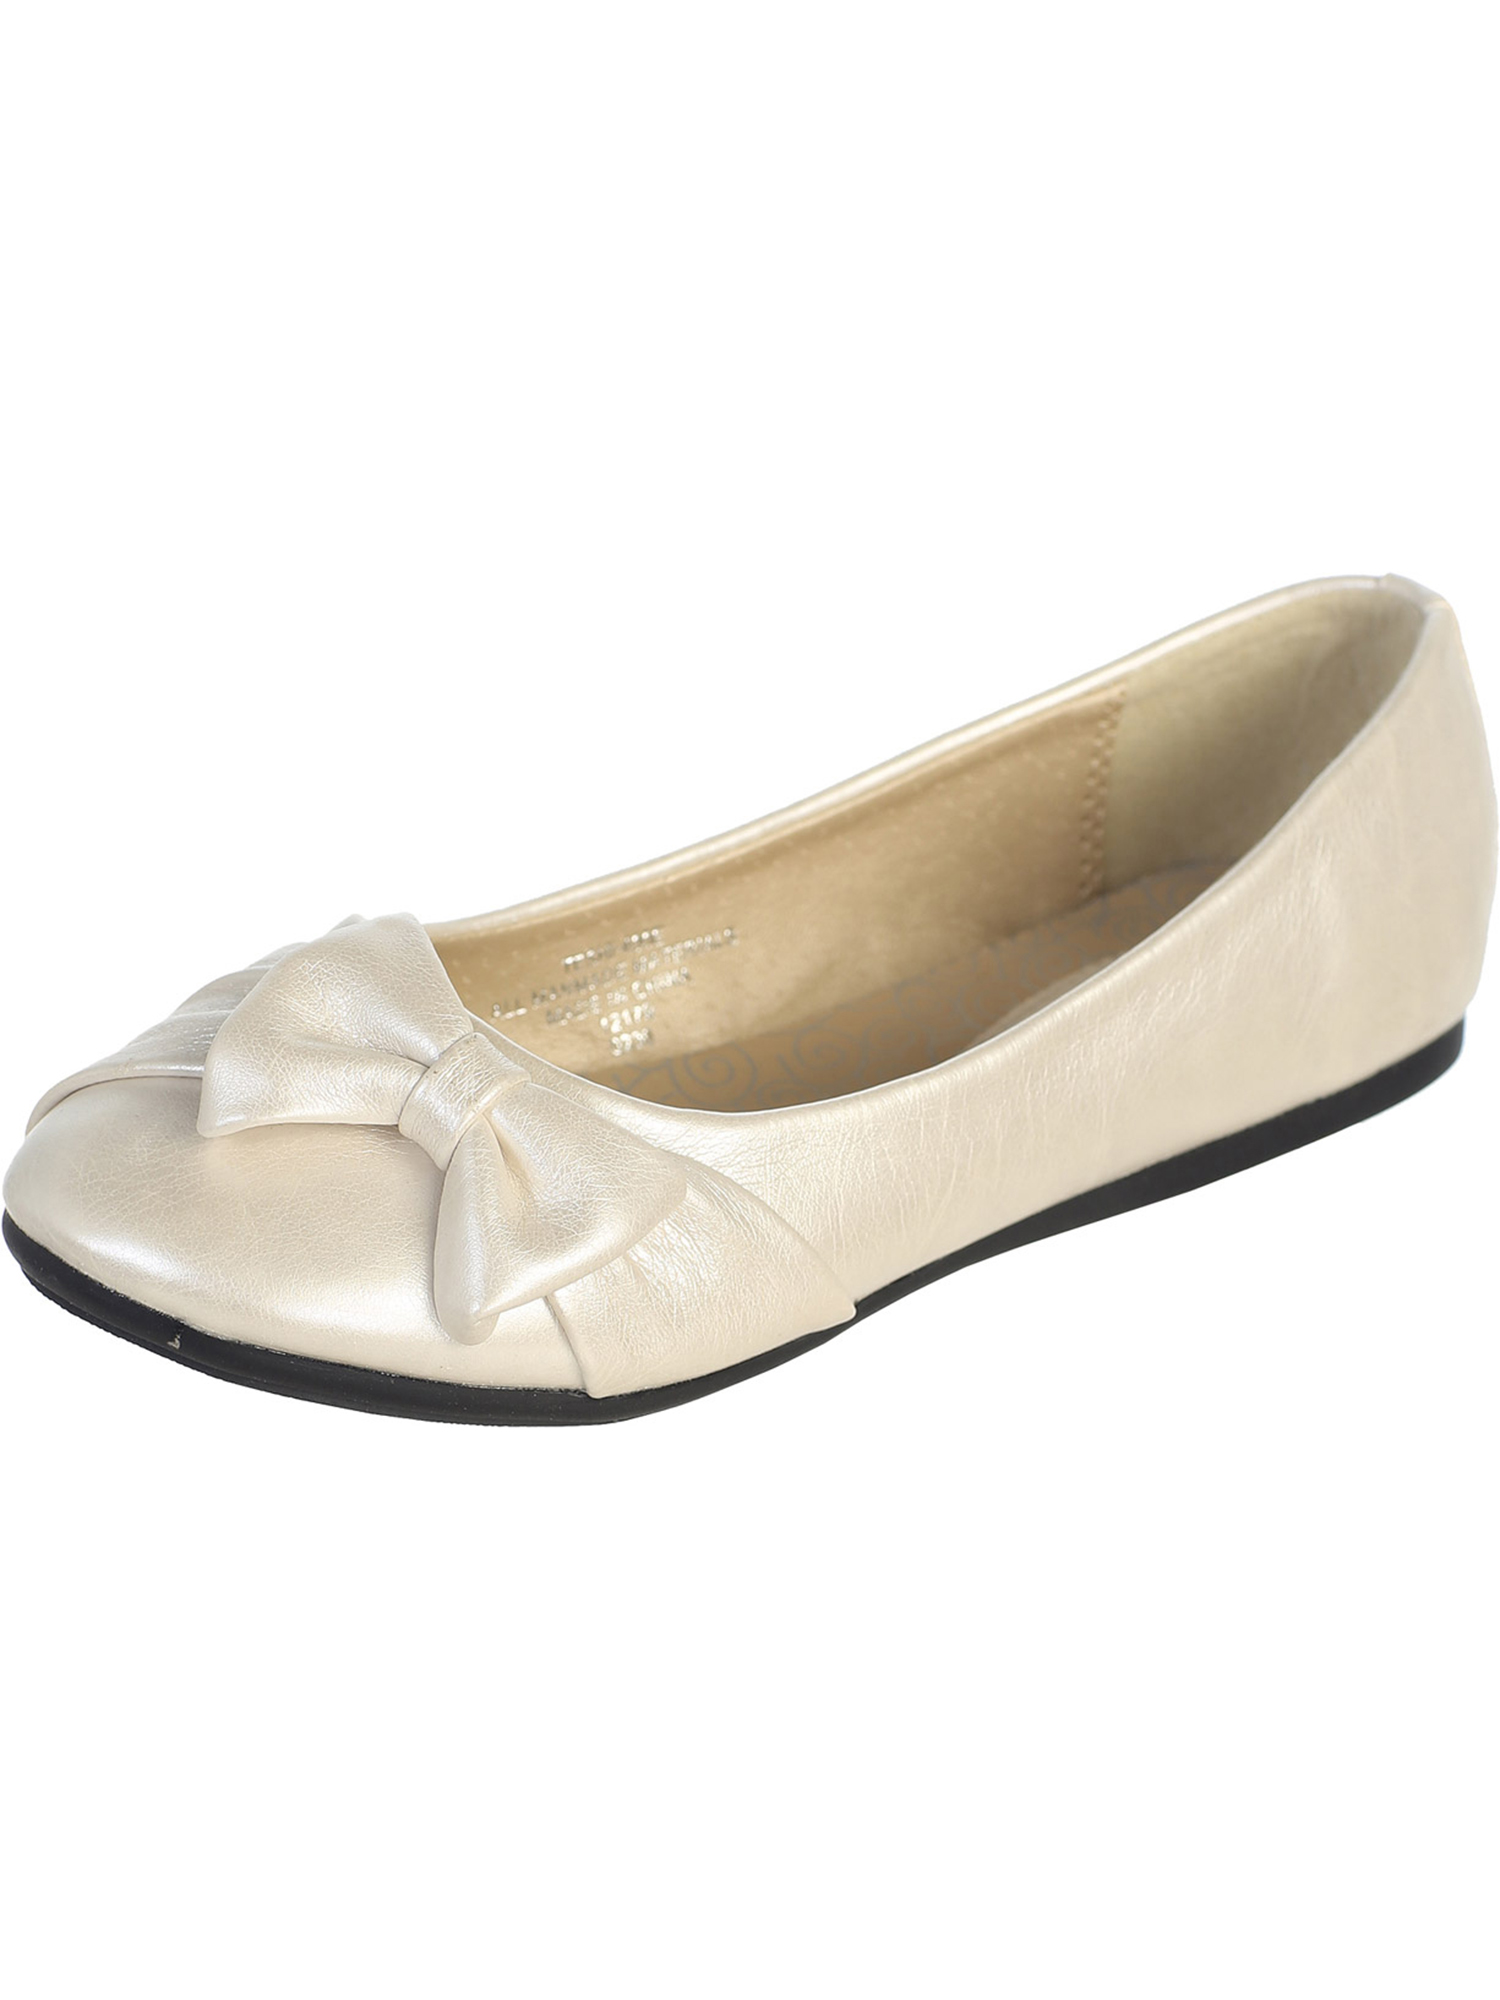 Ivory Pearl Girl's Flat Shoes with Side Bow Infant 5 1 - Christening.com